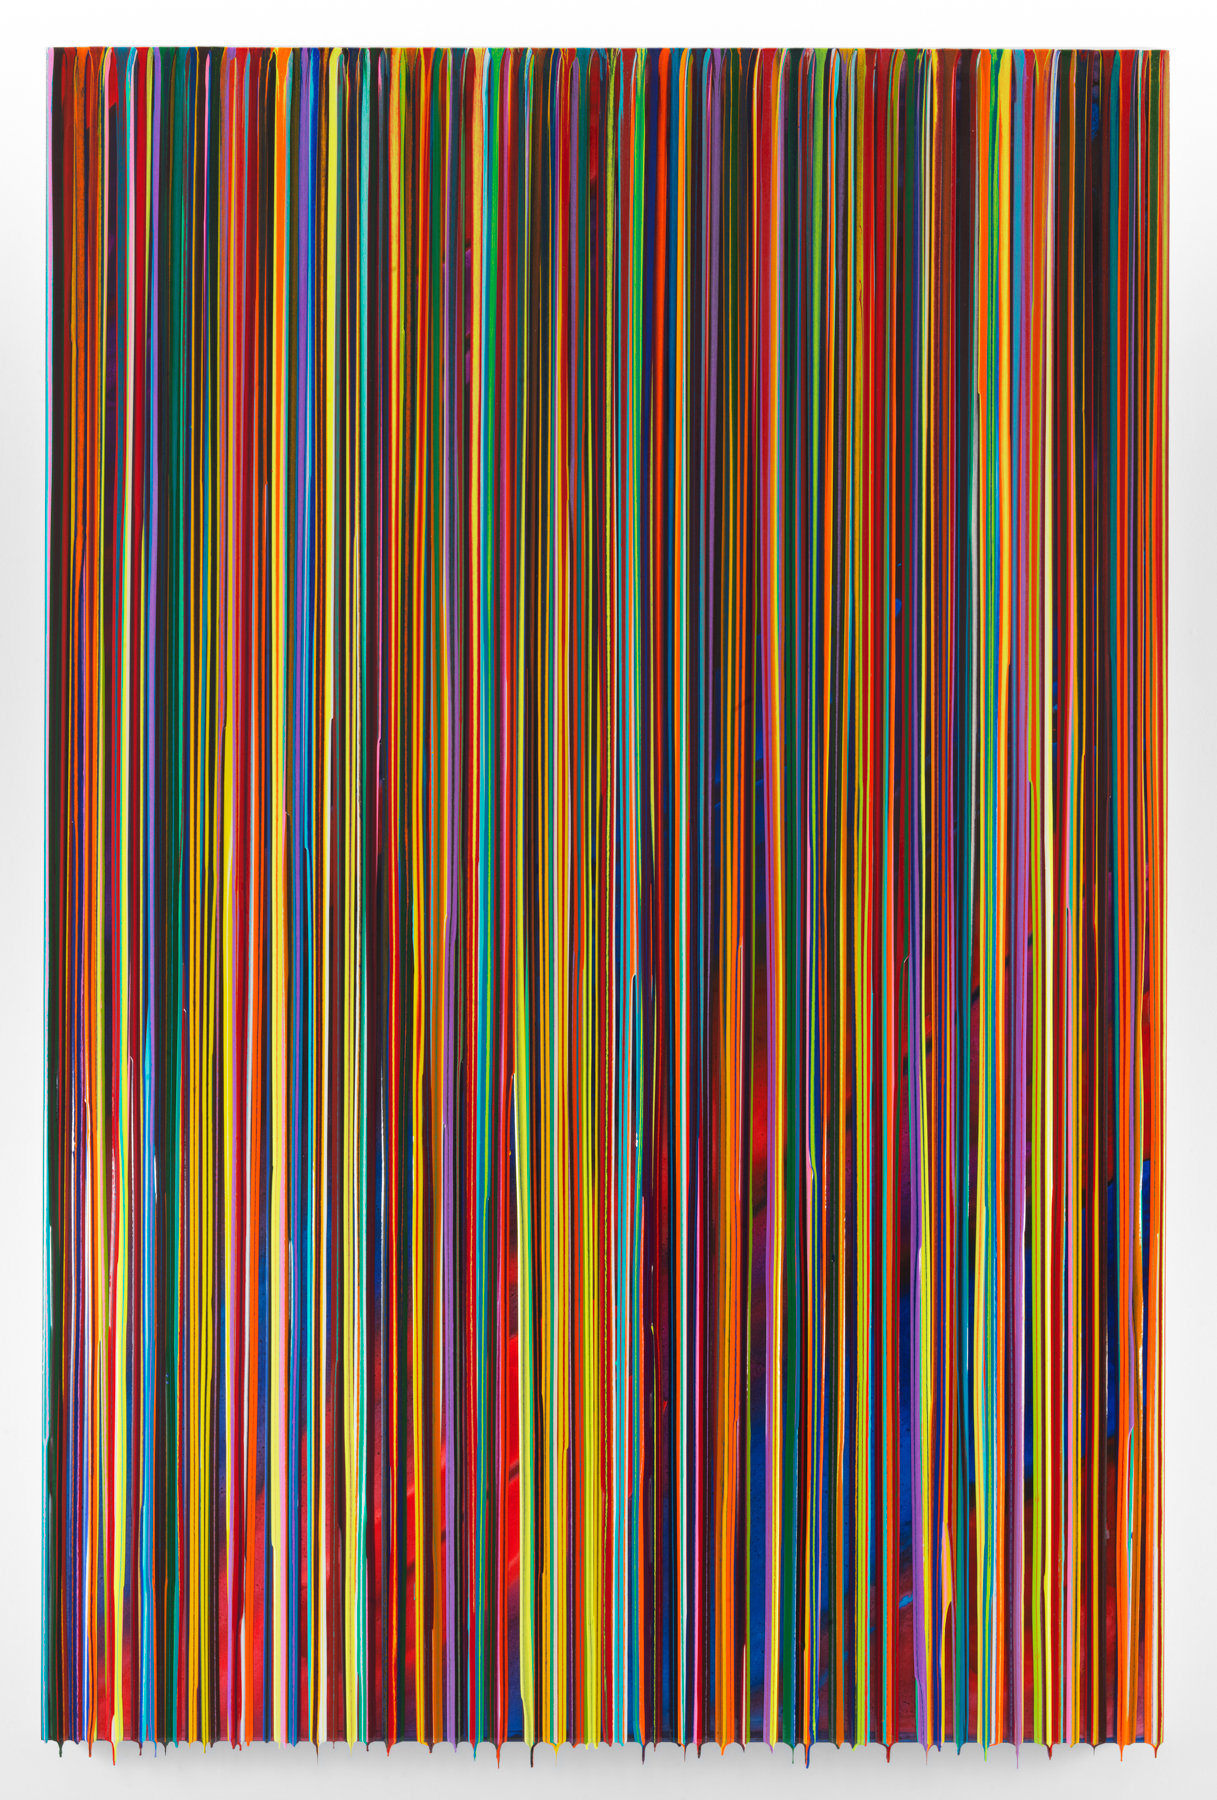 ETHEREALINTRUDER, 2016, Epoxy resin and pigments on wood, 90 x 60 inches, 228.6 x 152.4 cm, AMY#28448